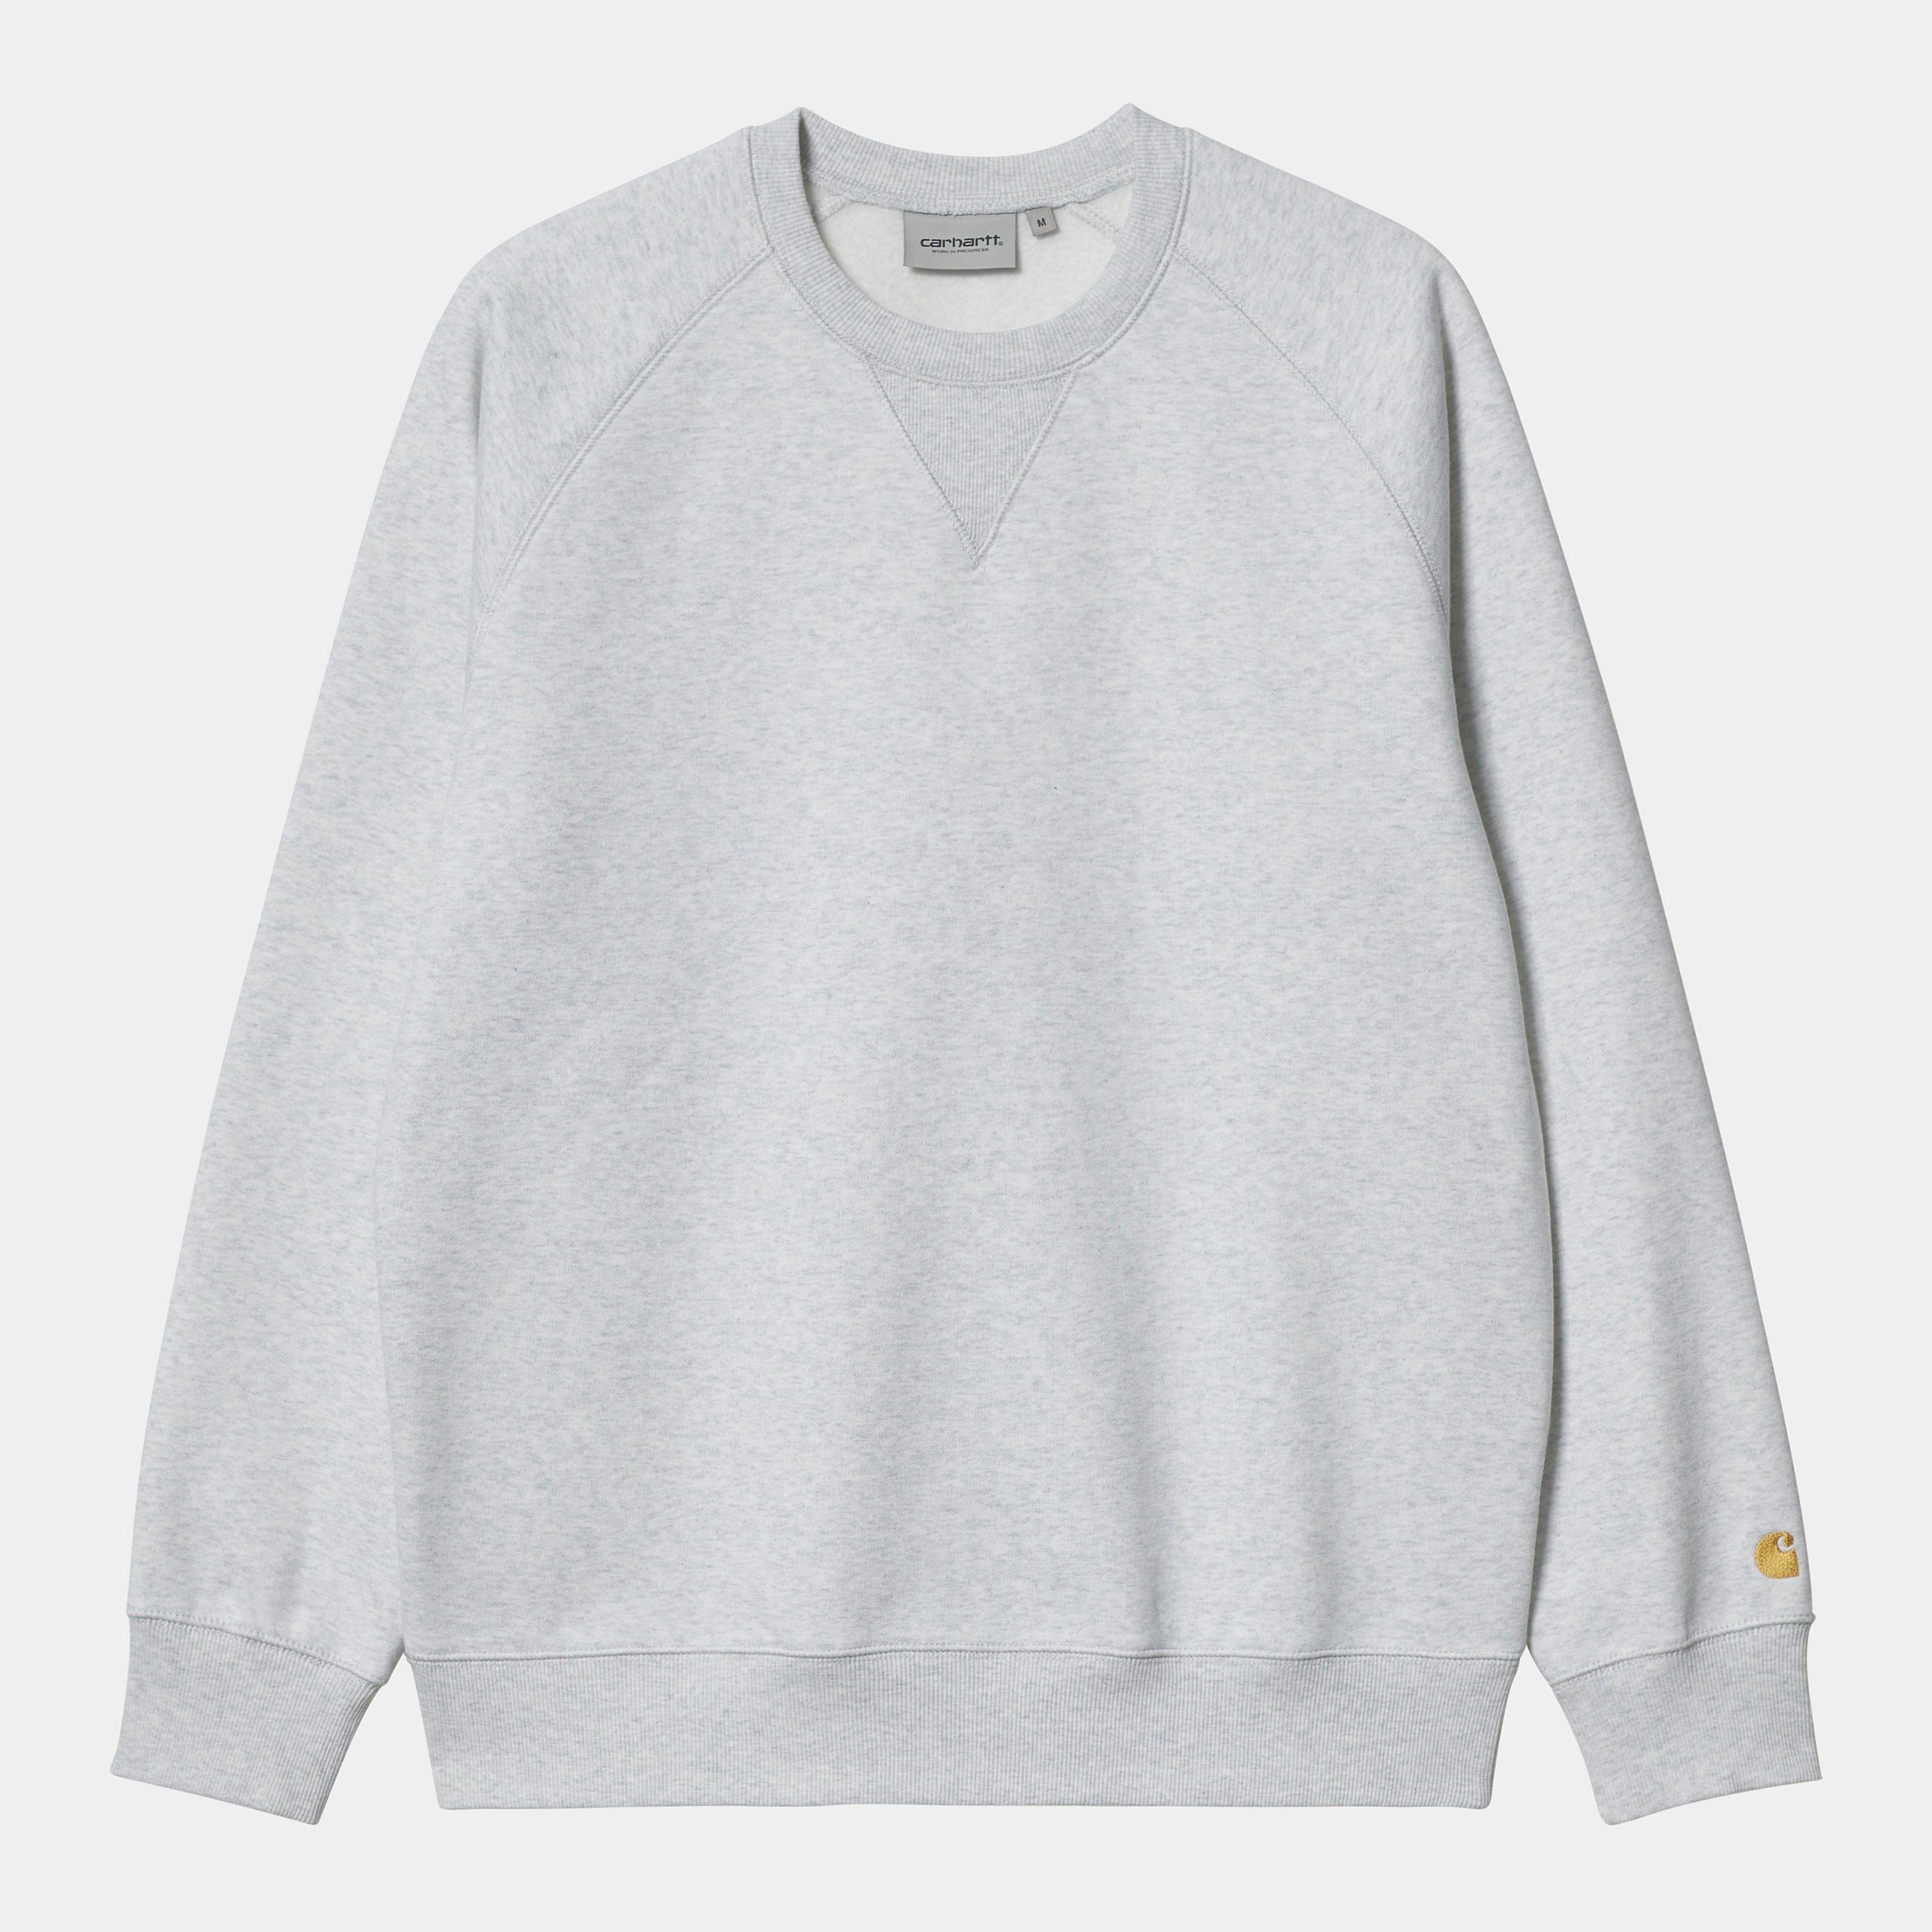 Carhartt Mens Chase Sweat Top - Ash Heather / Gold